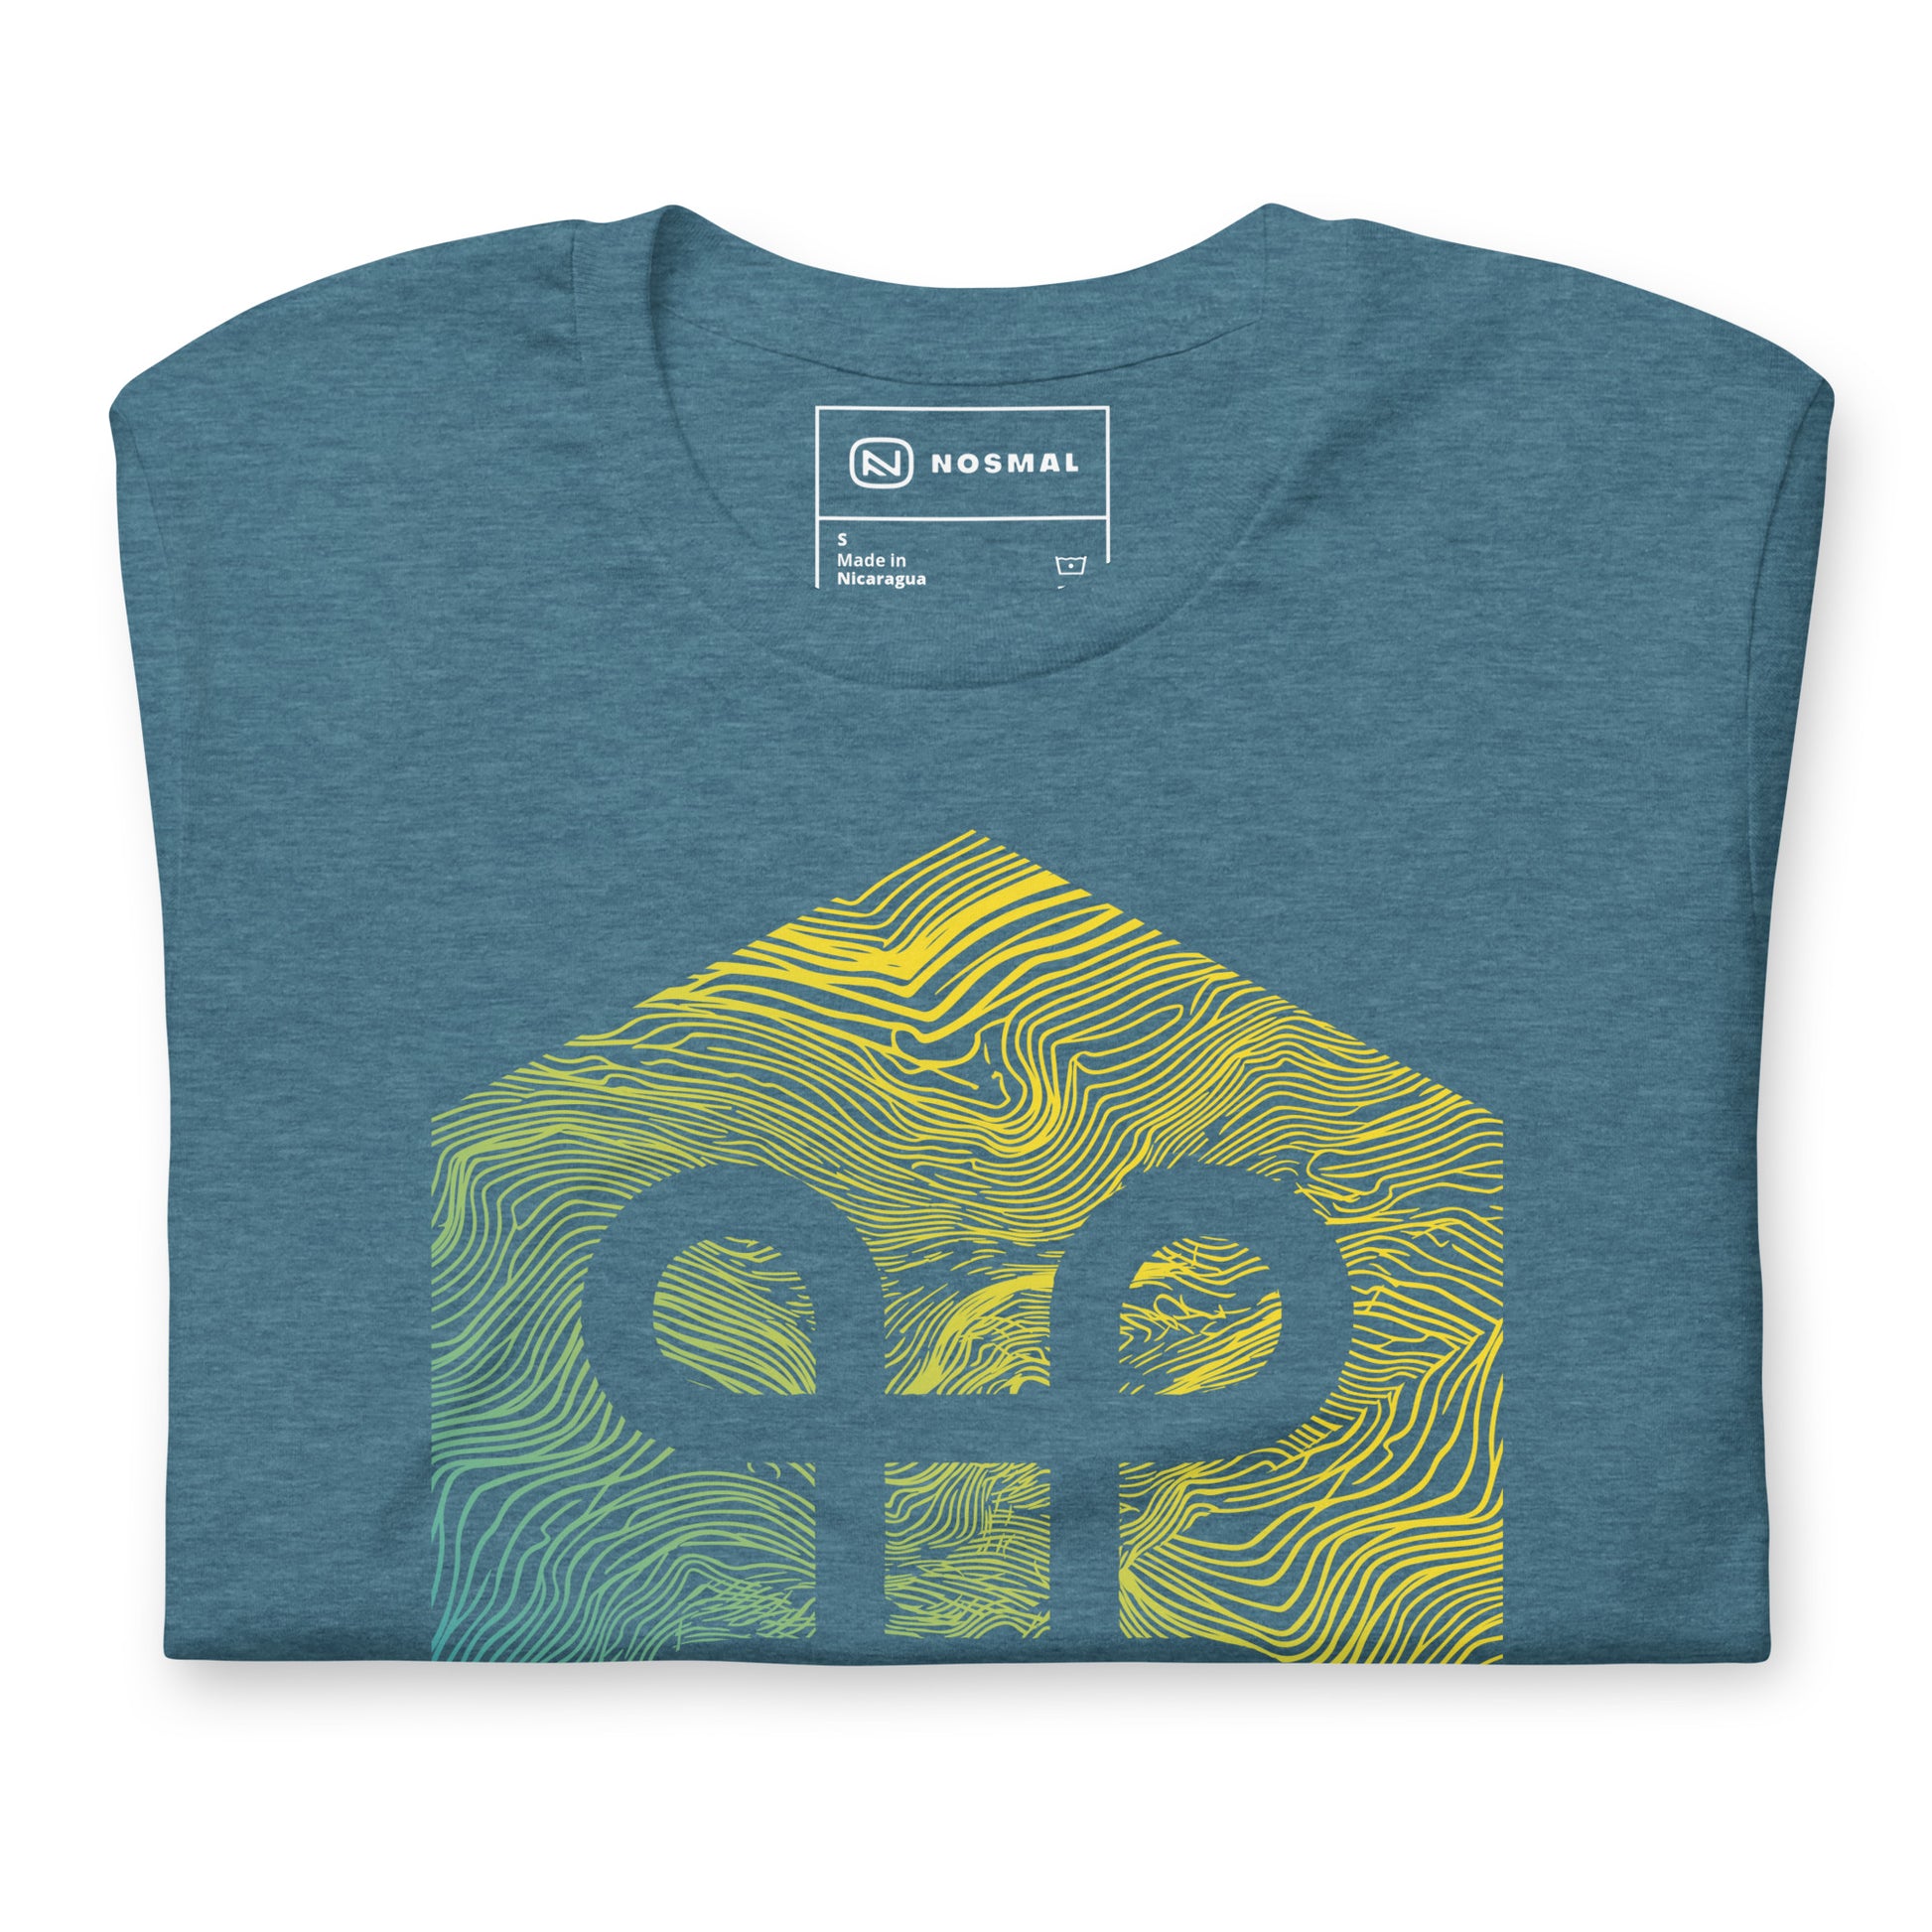 Top down view of the commander gradient design on heather deep teal unisex t-shirt.